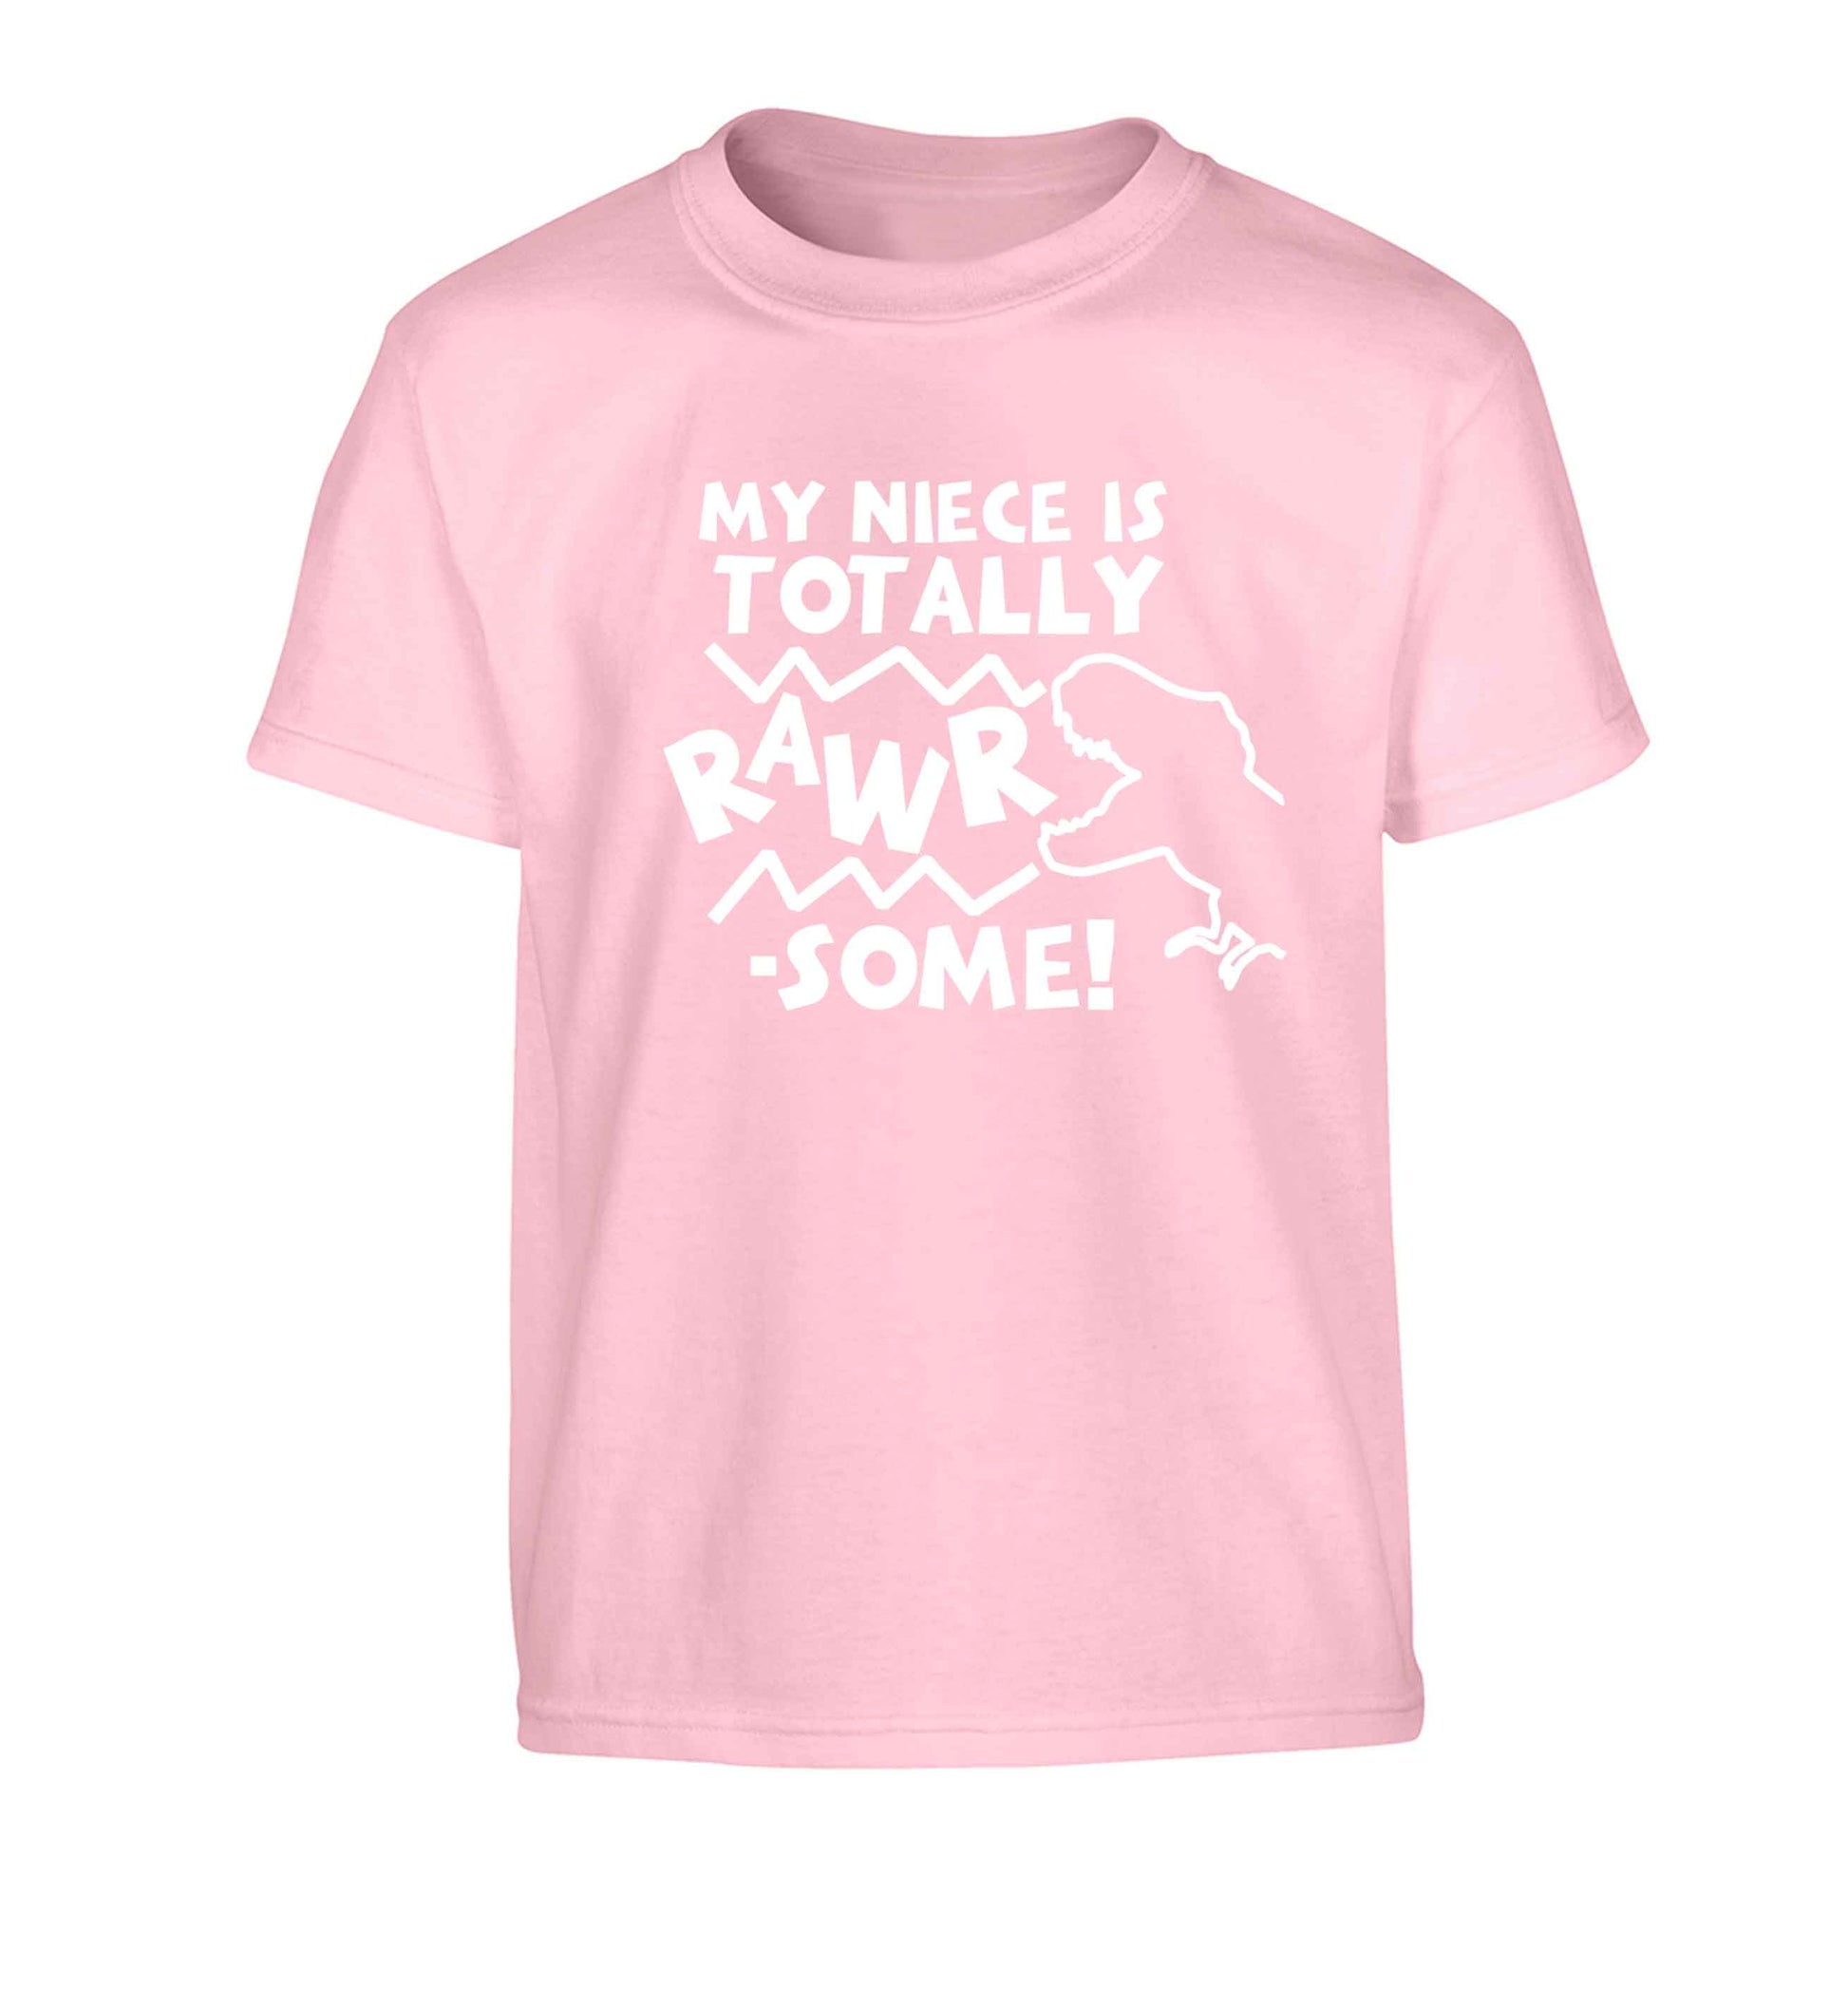 My niece is totally rawrsome Children's light pink Tshirt 12-13 Years